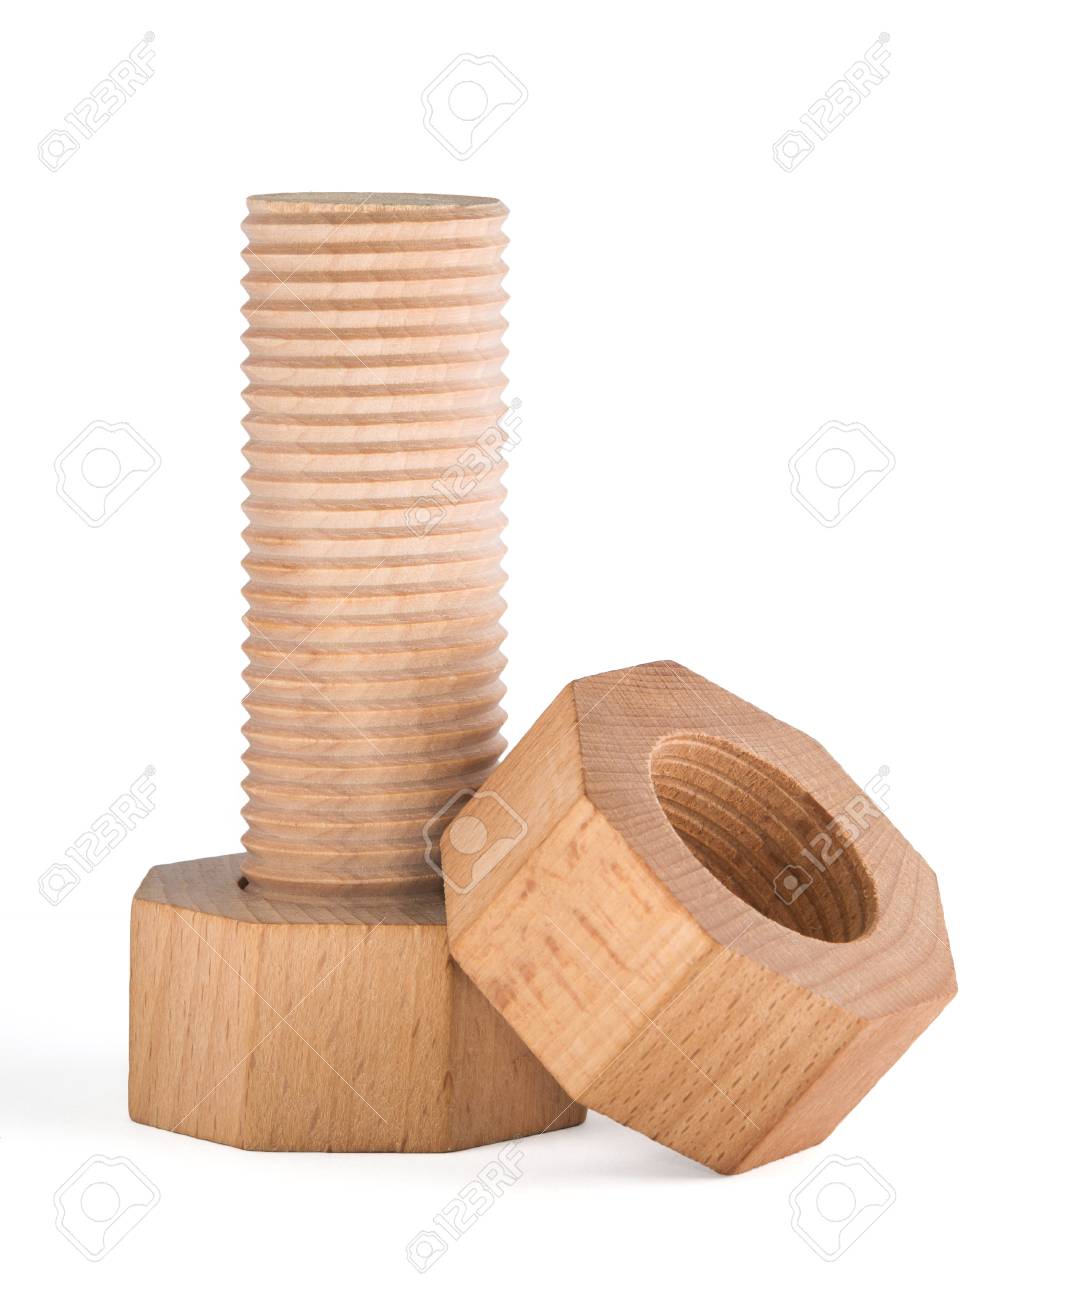 55228765-wooden-bolt-with-the-wooden-screw-nut-.jpg